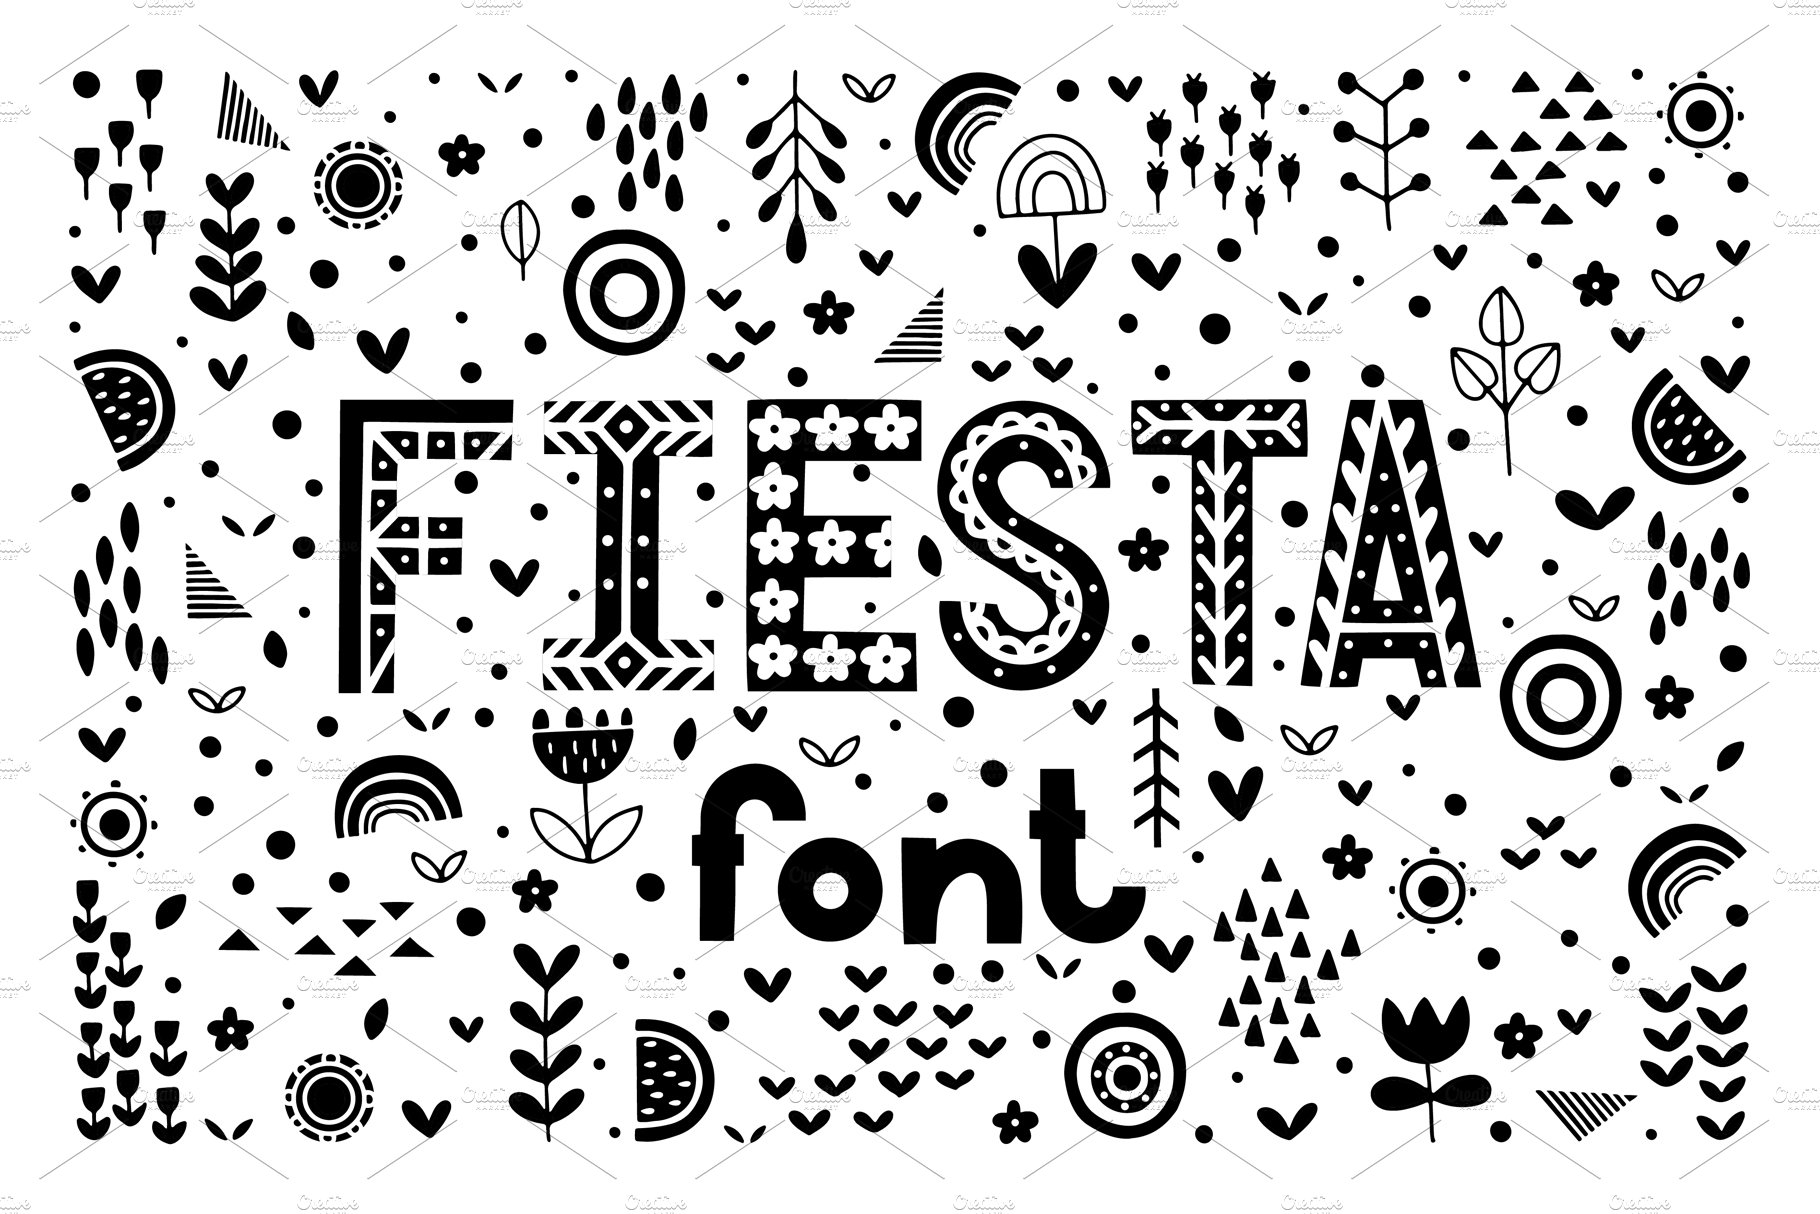 FIESTA font cover image.